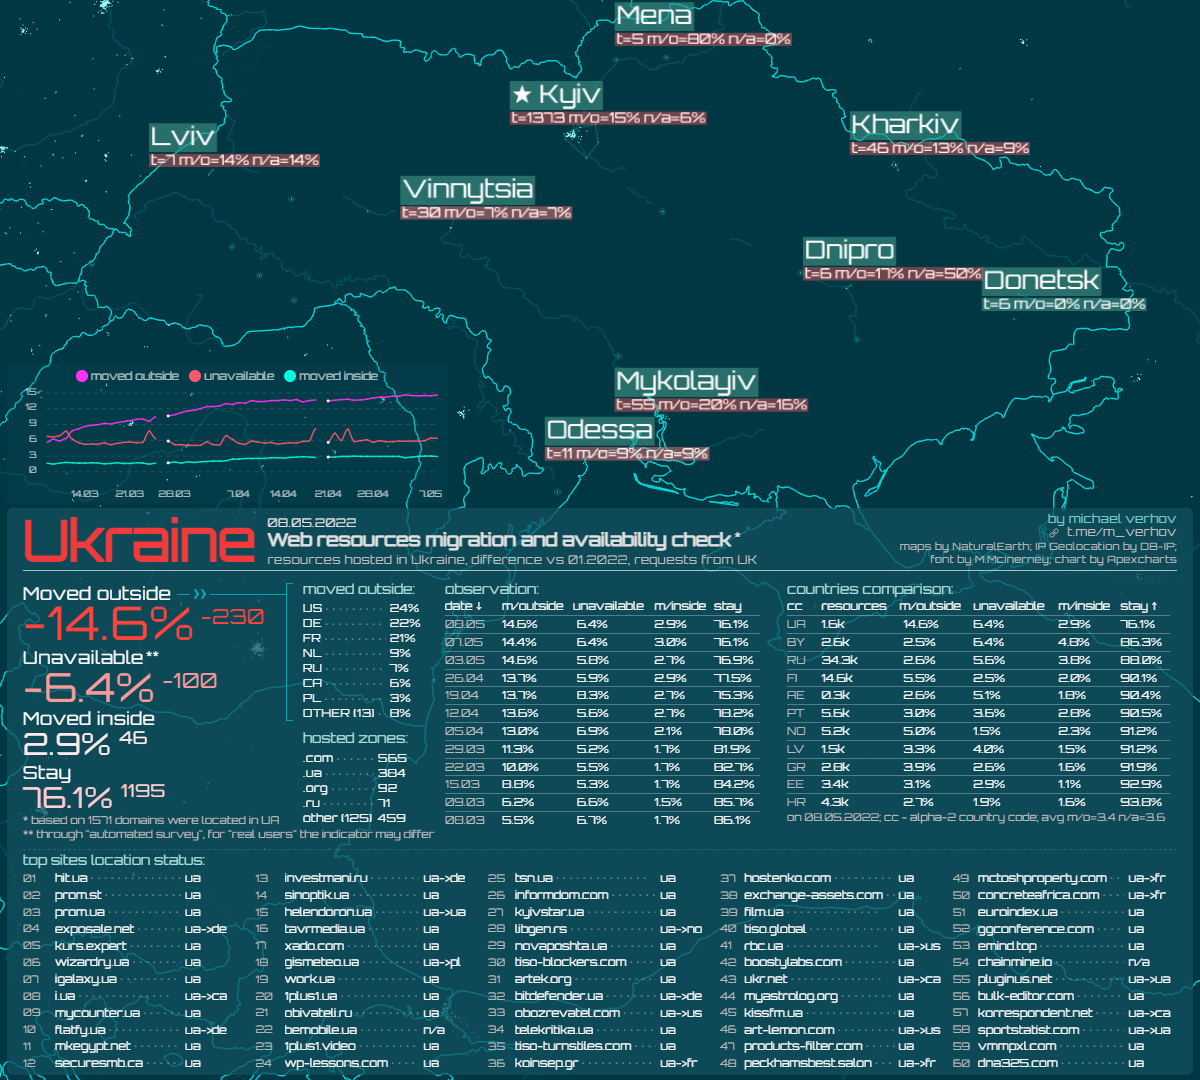 The Impact of War in Ukraine on Relocation and Availability of Web Resources